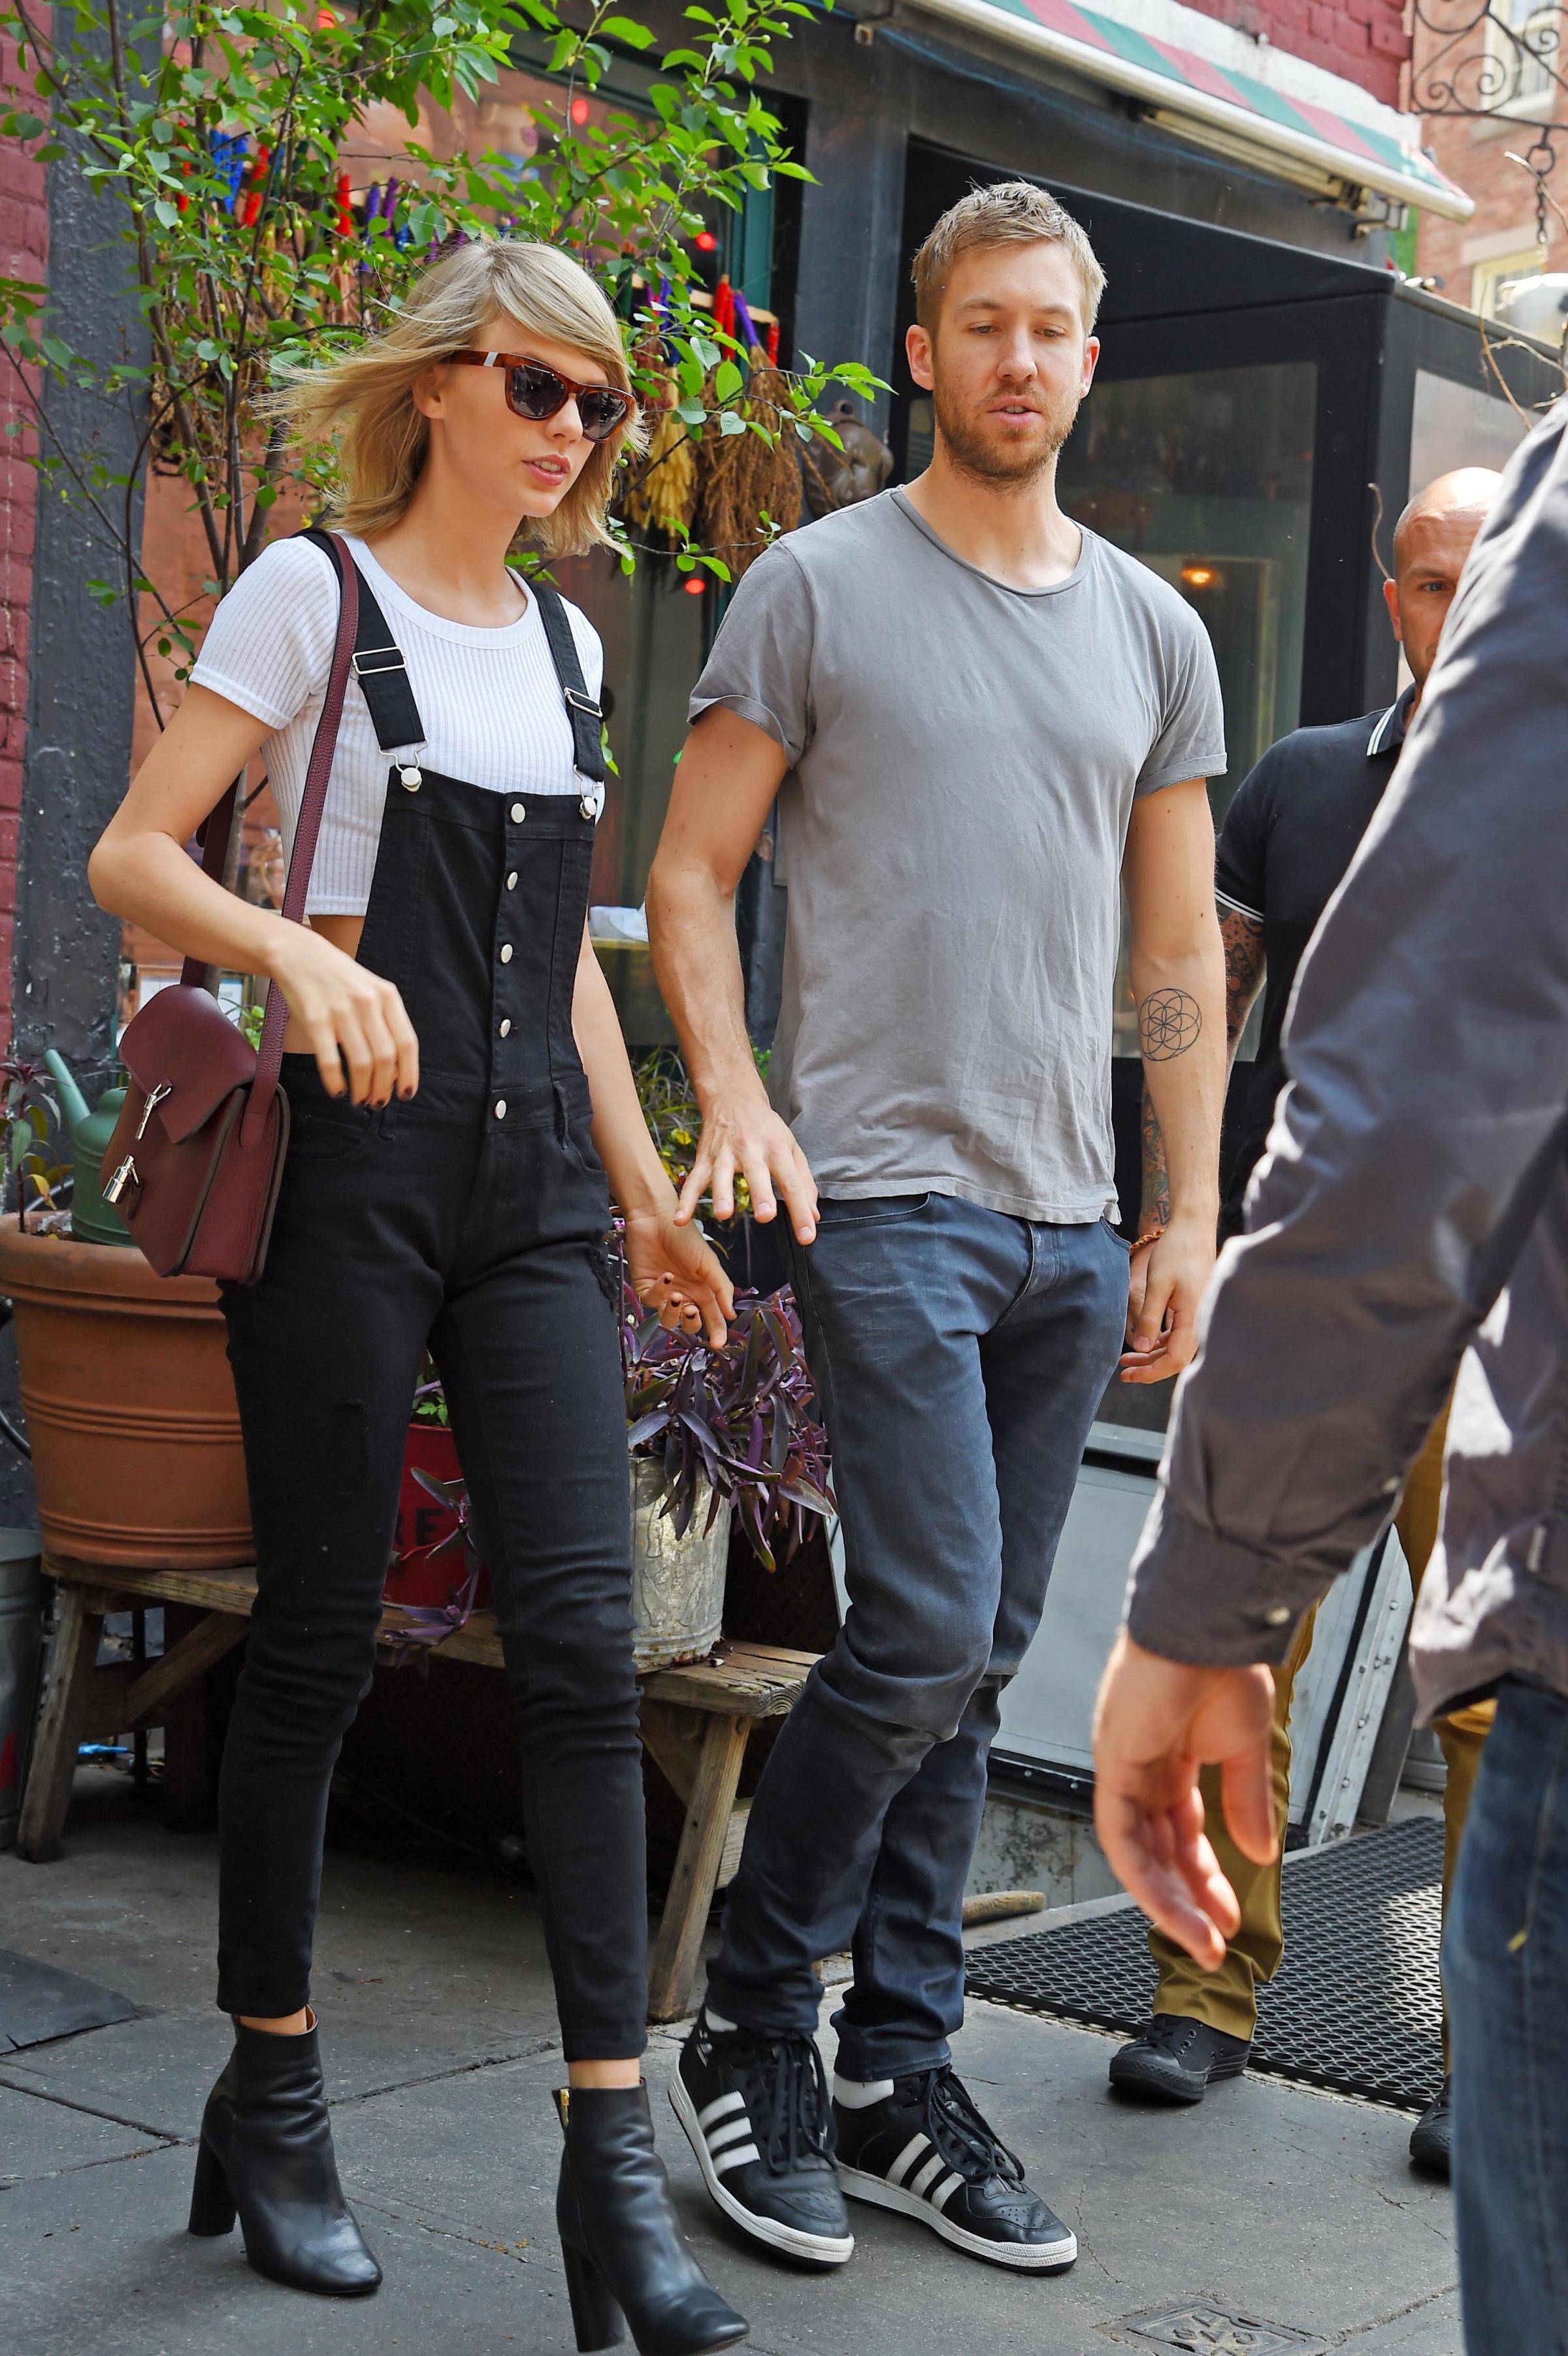 Taylor Swift and Calvin Harris: Taylor Swift and Calvin Harris might be the most buzzed-about split of the summer. The duo called it quits after 15 months of dating, but Swift made headlines when she started dating actor Tom Hiddleston just two weeks after her breakup from Harris. Since the split, the drama has only ramped up, most notably with social media skirmishes. In the words of T. Swift — it used to be mad love, but now there's bad blood.